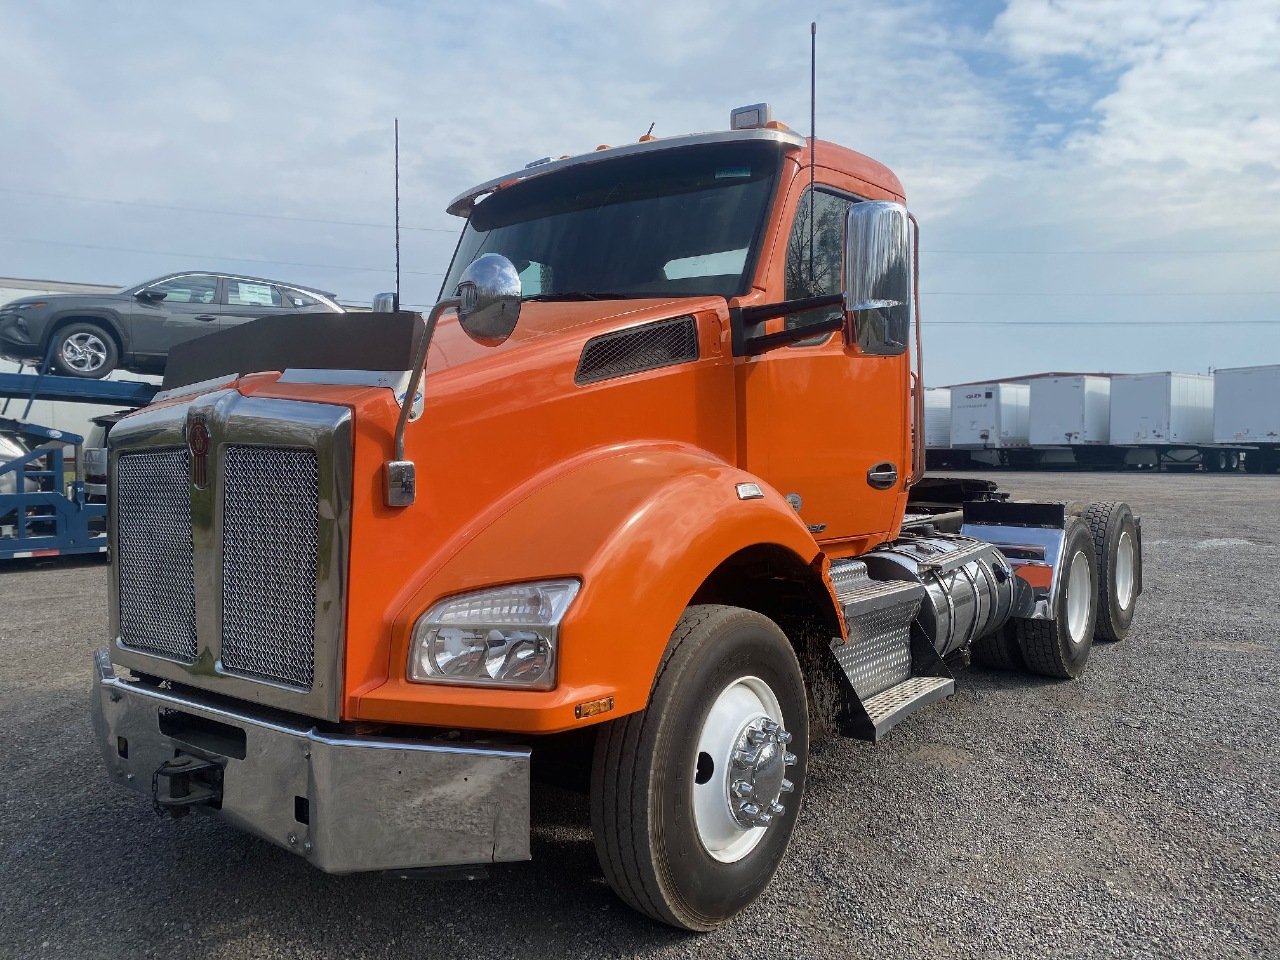 USED 2018 KENWORTH T880 TANDEM AXLE DAYCAB TRUCK #15281